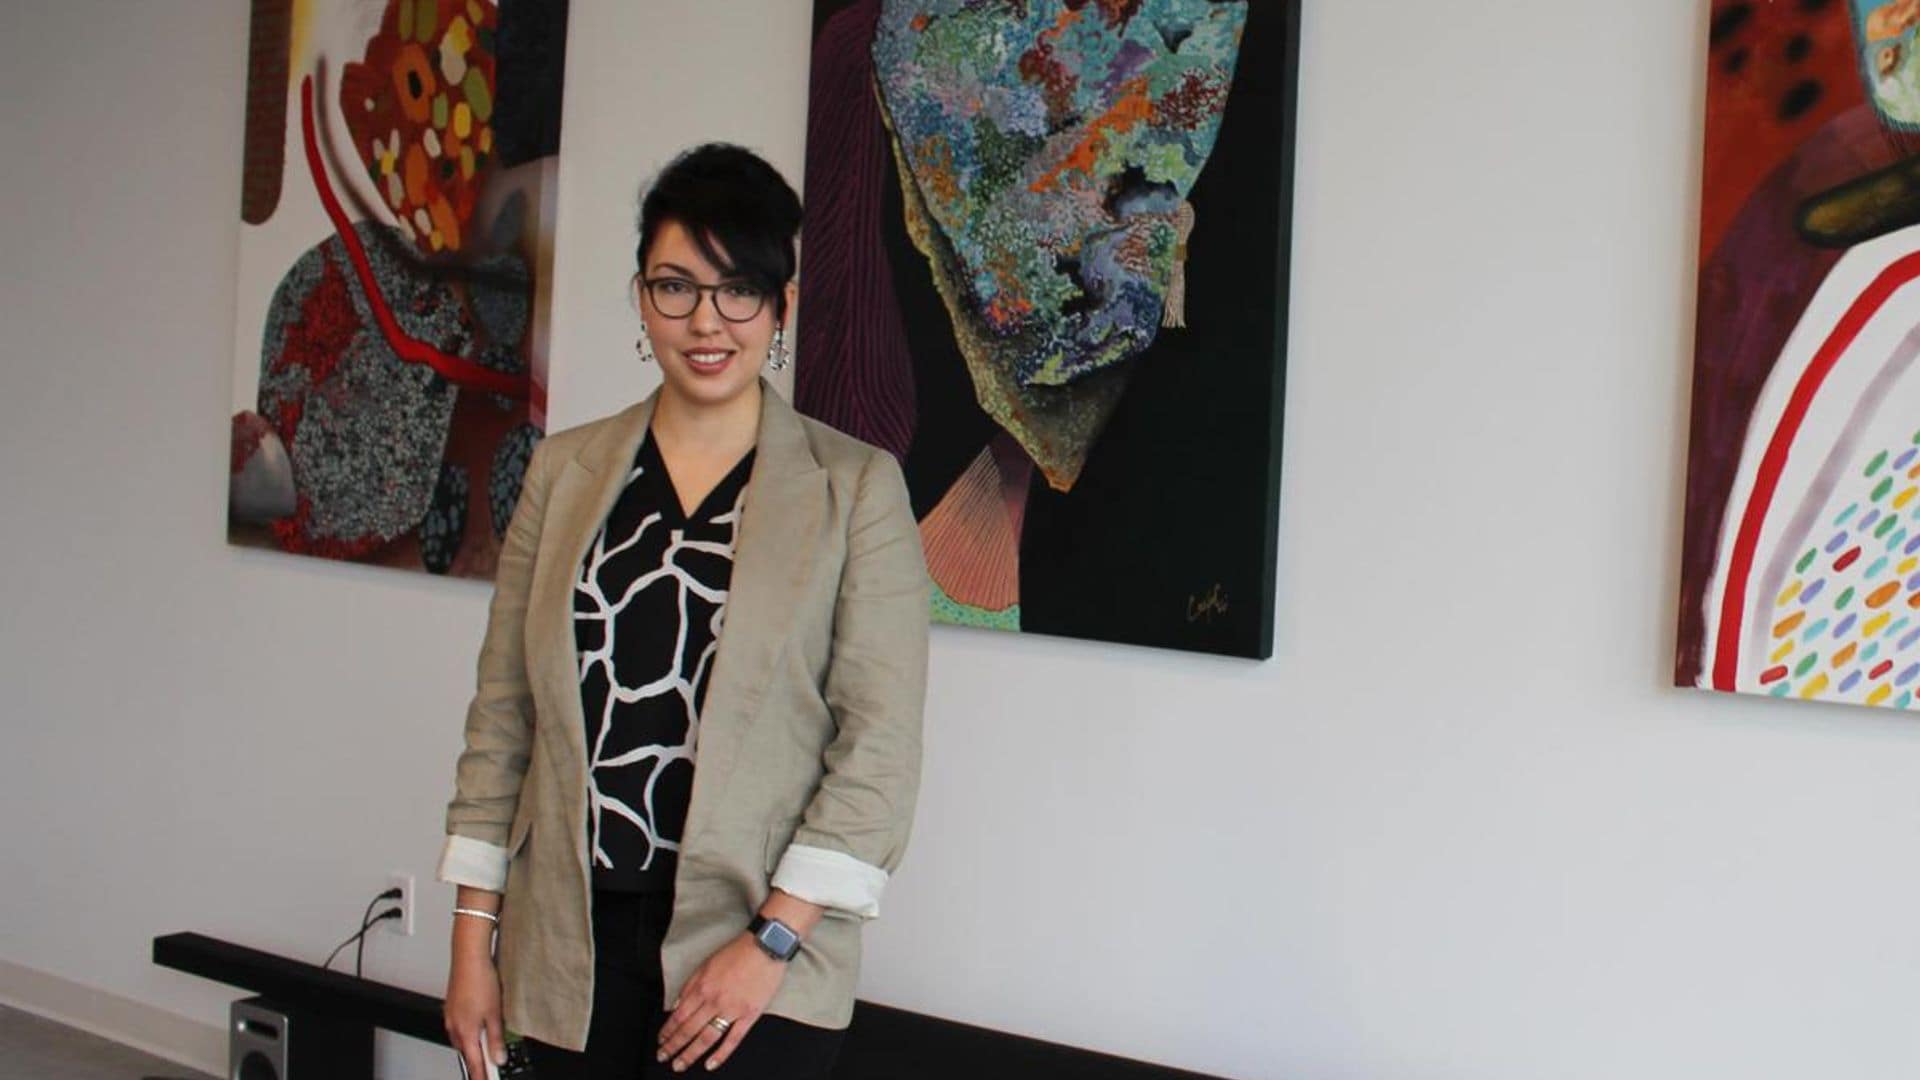 Ecuadoran painter Carla Contreras becomes the ‘Artist in Residence’ in a state-of-the-art building in Atlanta